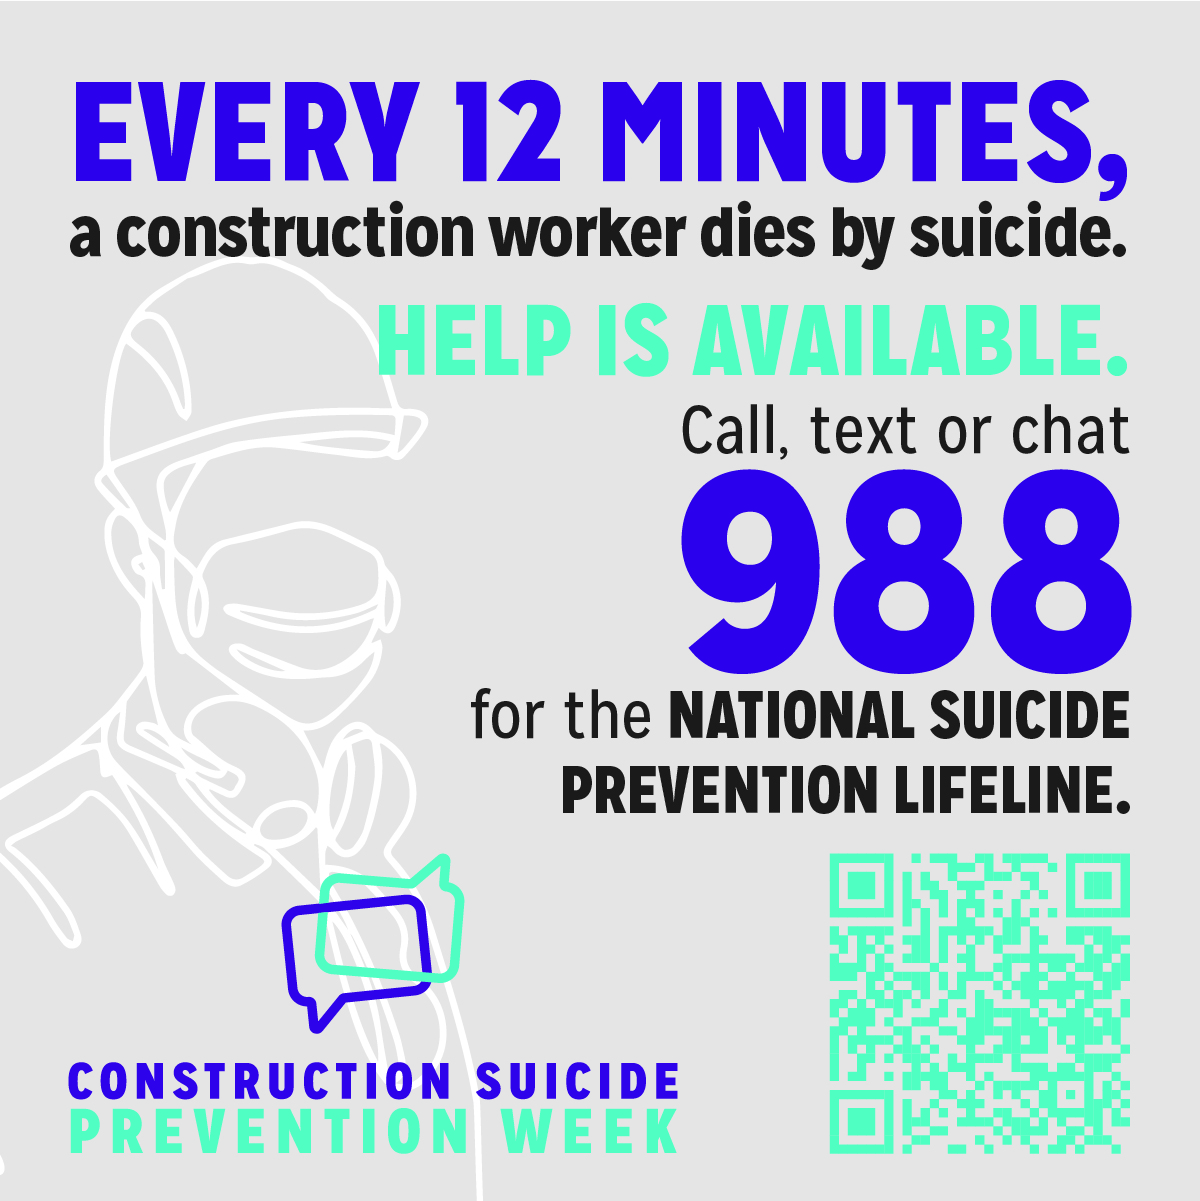 Graphic depicting a magnet available to order as part of a bundle. The magnet says "Every 12 minutes, a construction worker dies by suicide. Help is available. Call, text or chat 988 for the National Suicide Prevention Lifeline. Construction Suicide Prevention Week." There is a QR code linking to www.constructionsuicideprevention.com.